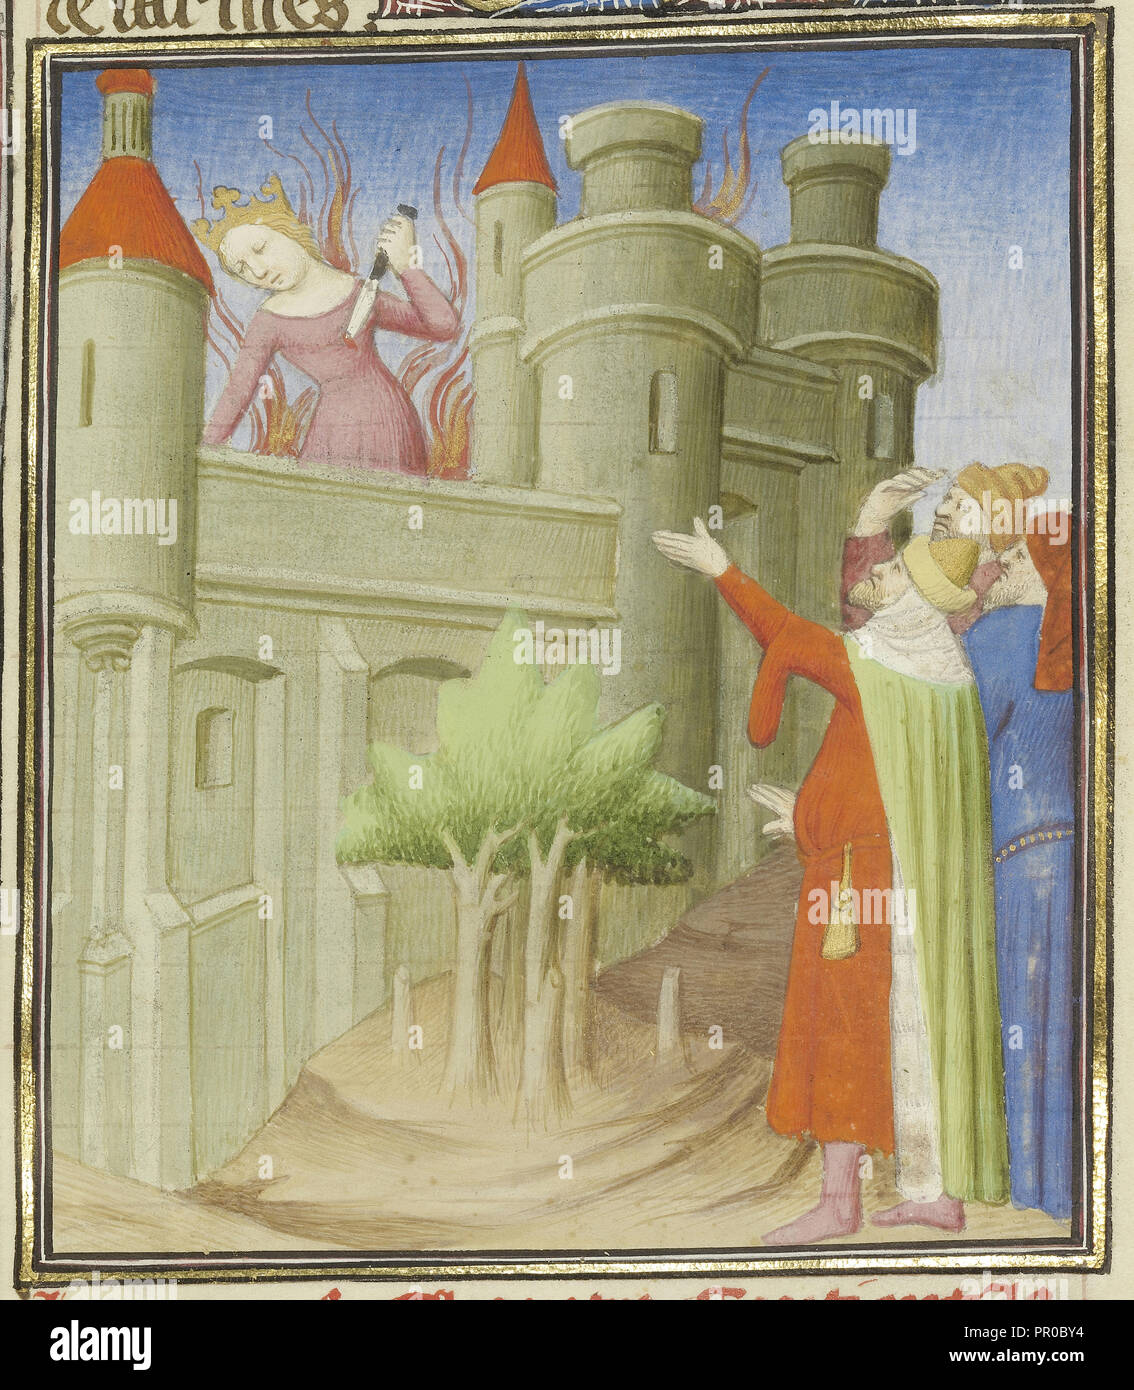 The Suicide of Queen Dido; Paris, France; about 1413 - 1415; Tempera colors, gold leaf, gold paint, and ink on parchment; Leaf Stock Photo